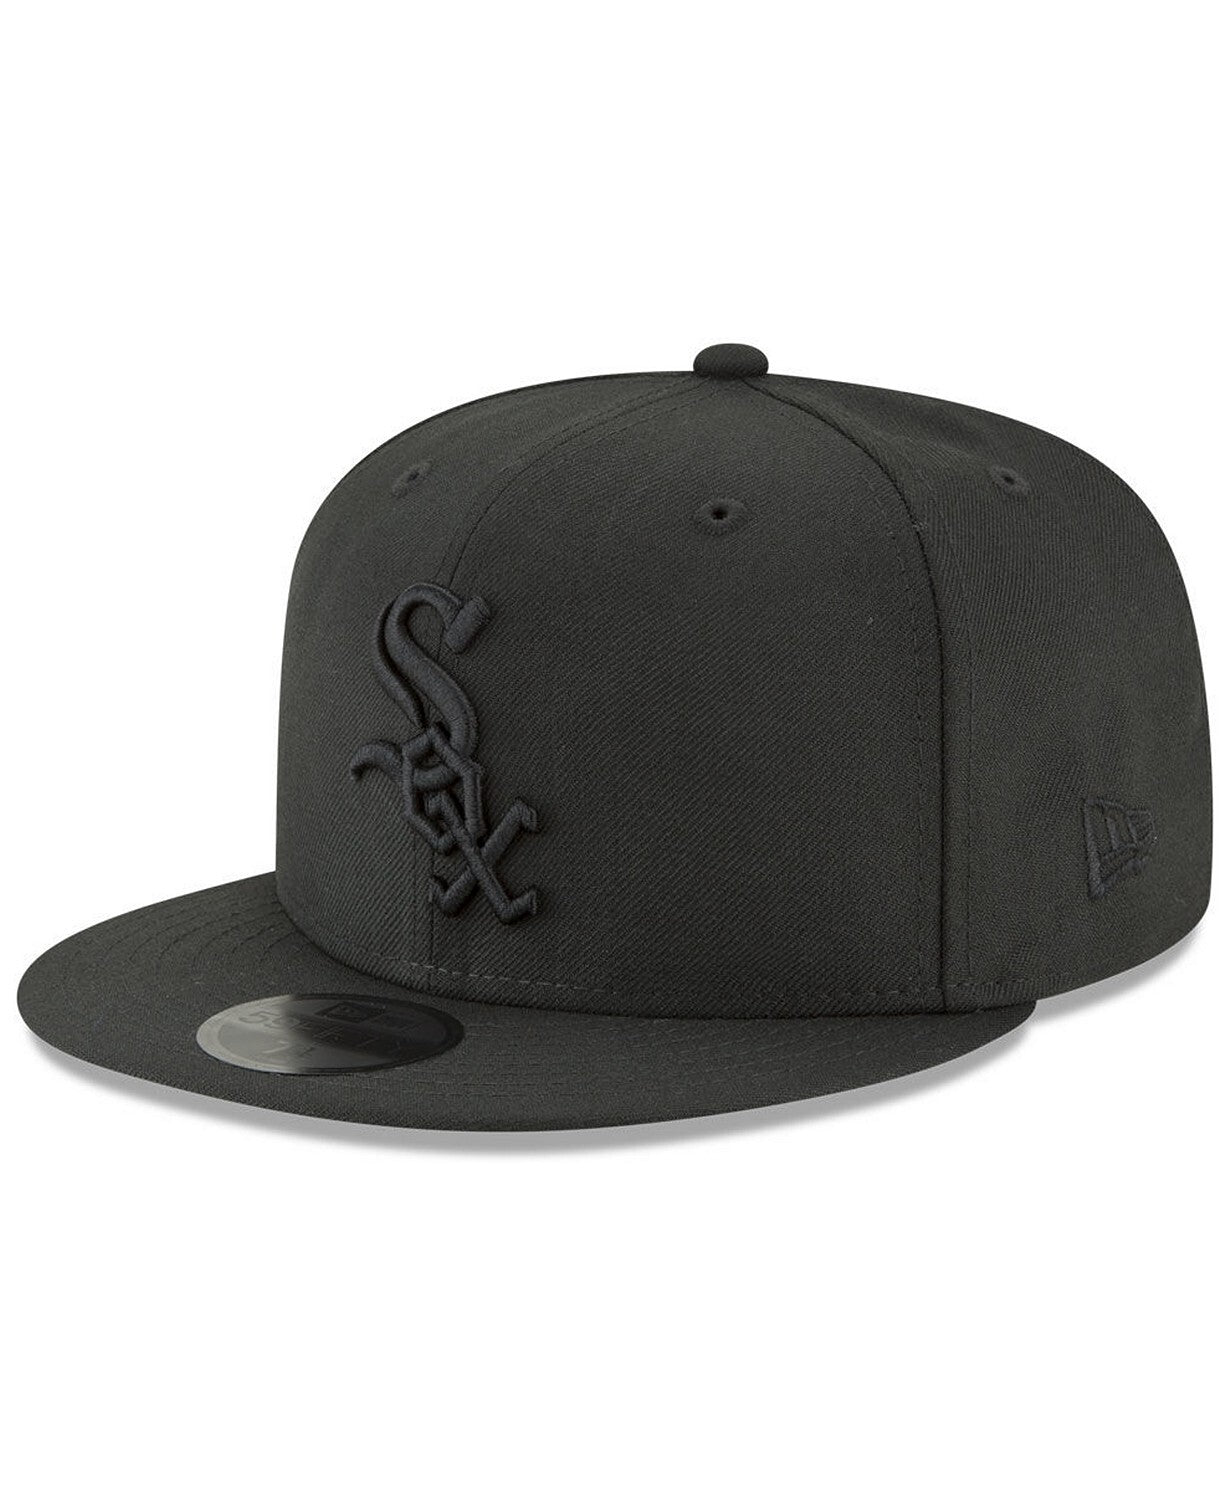 Chicago White Sox NEW ERA BASIC 59FIFTY FITTED-BLACK/WHITE Nvsoccer.com Thecoliseum